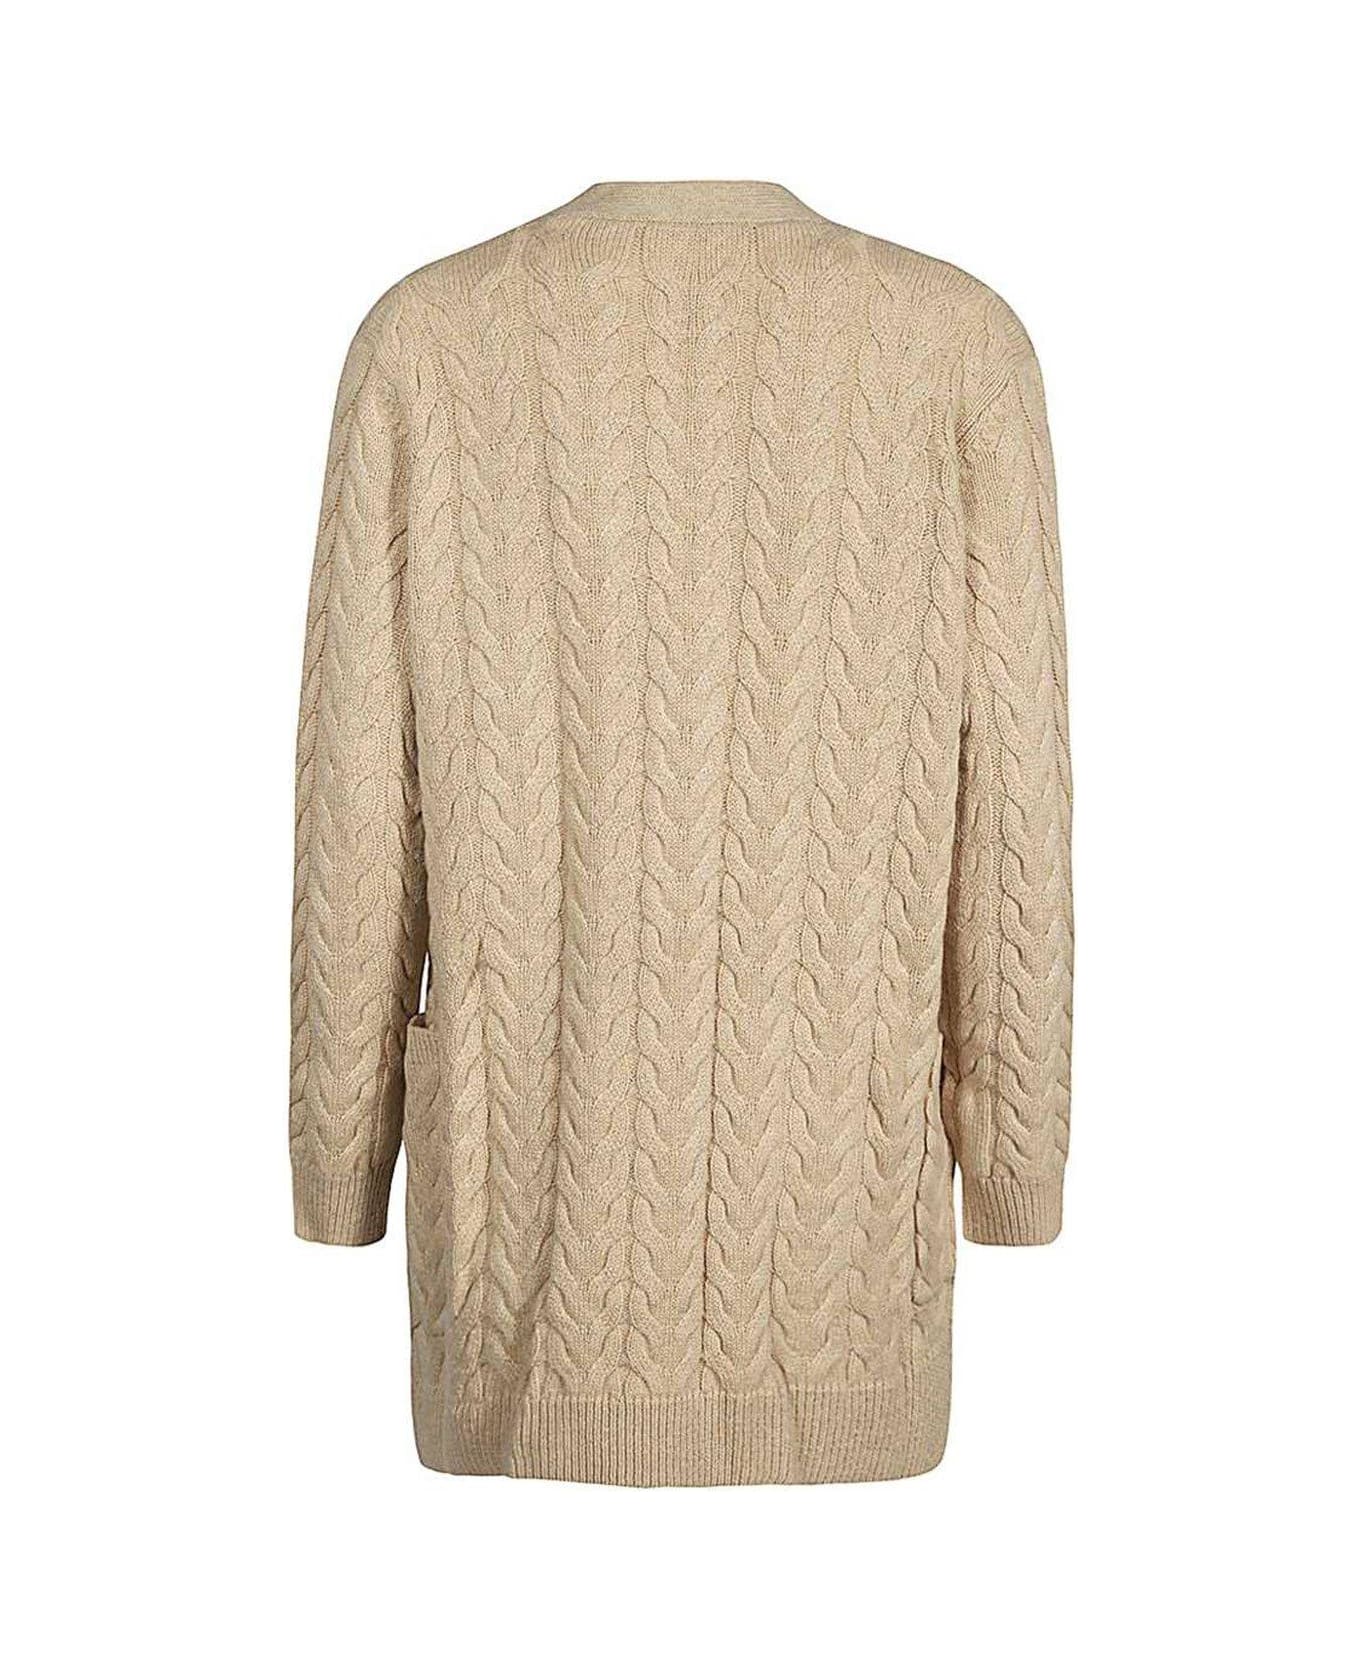 Max Mara Buttoned Long-sleeved Knitted Cardigan カーディガン